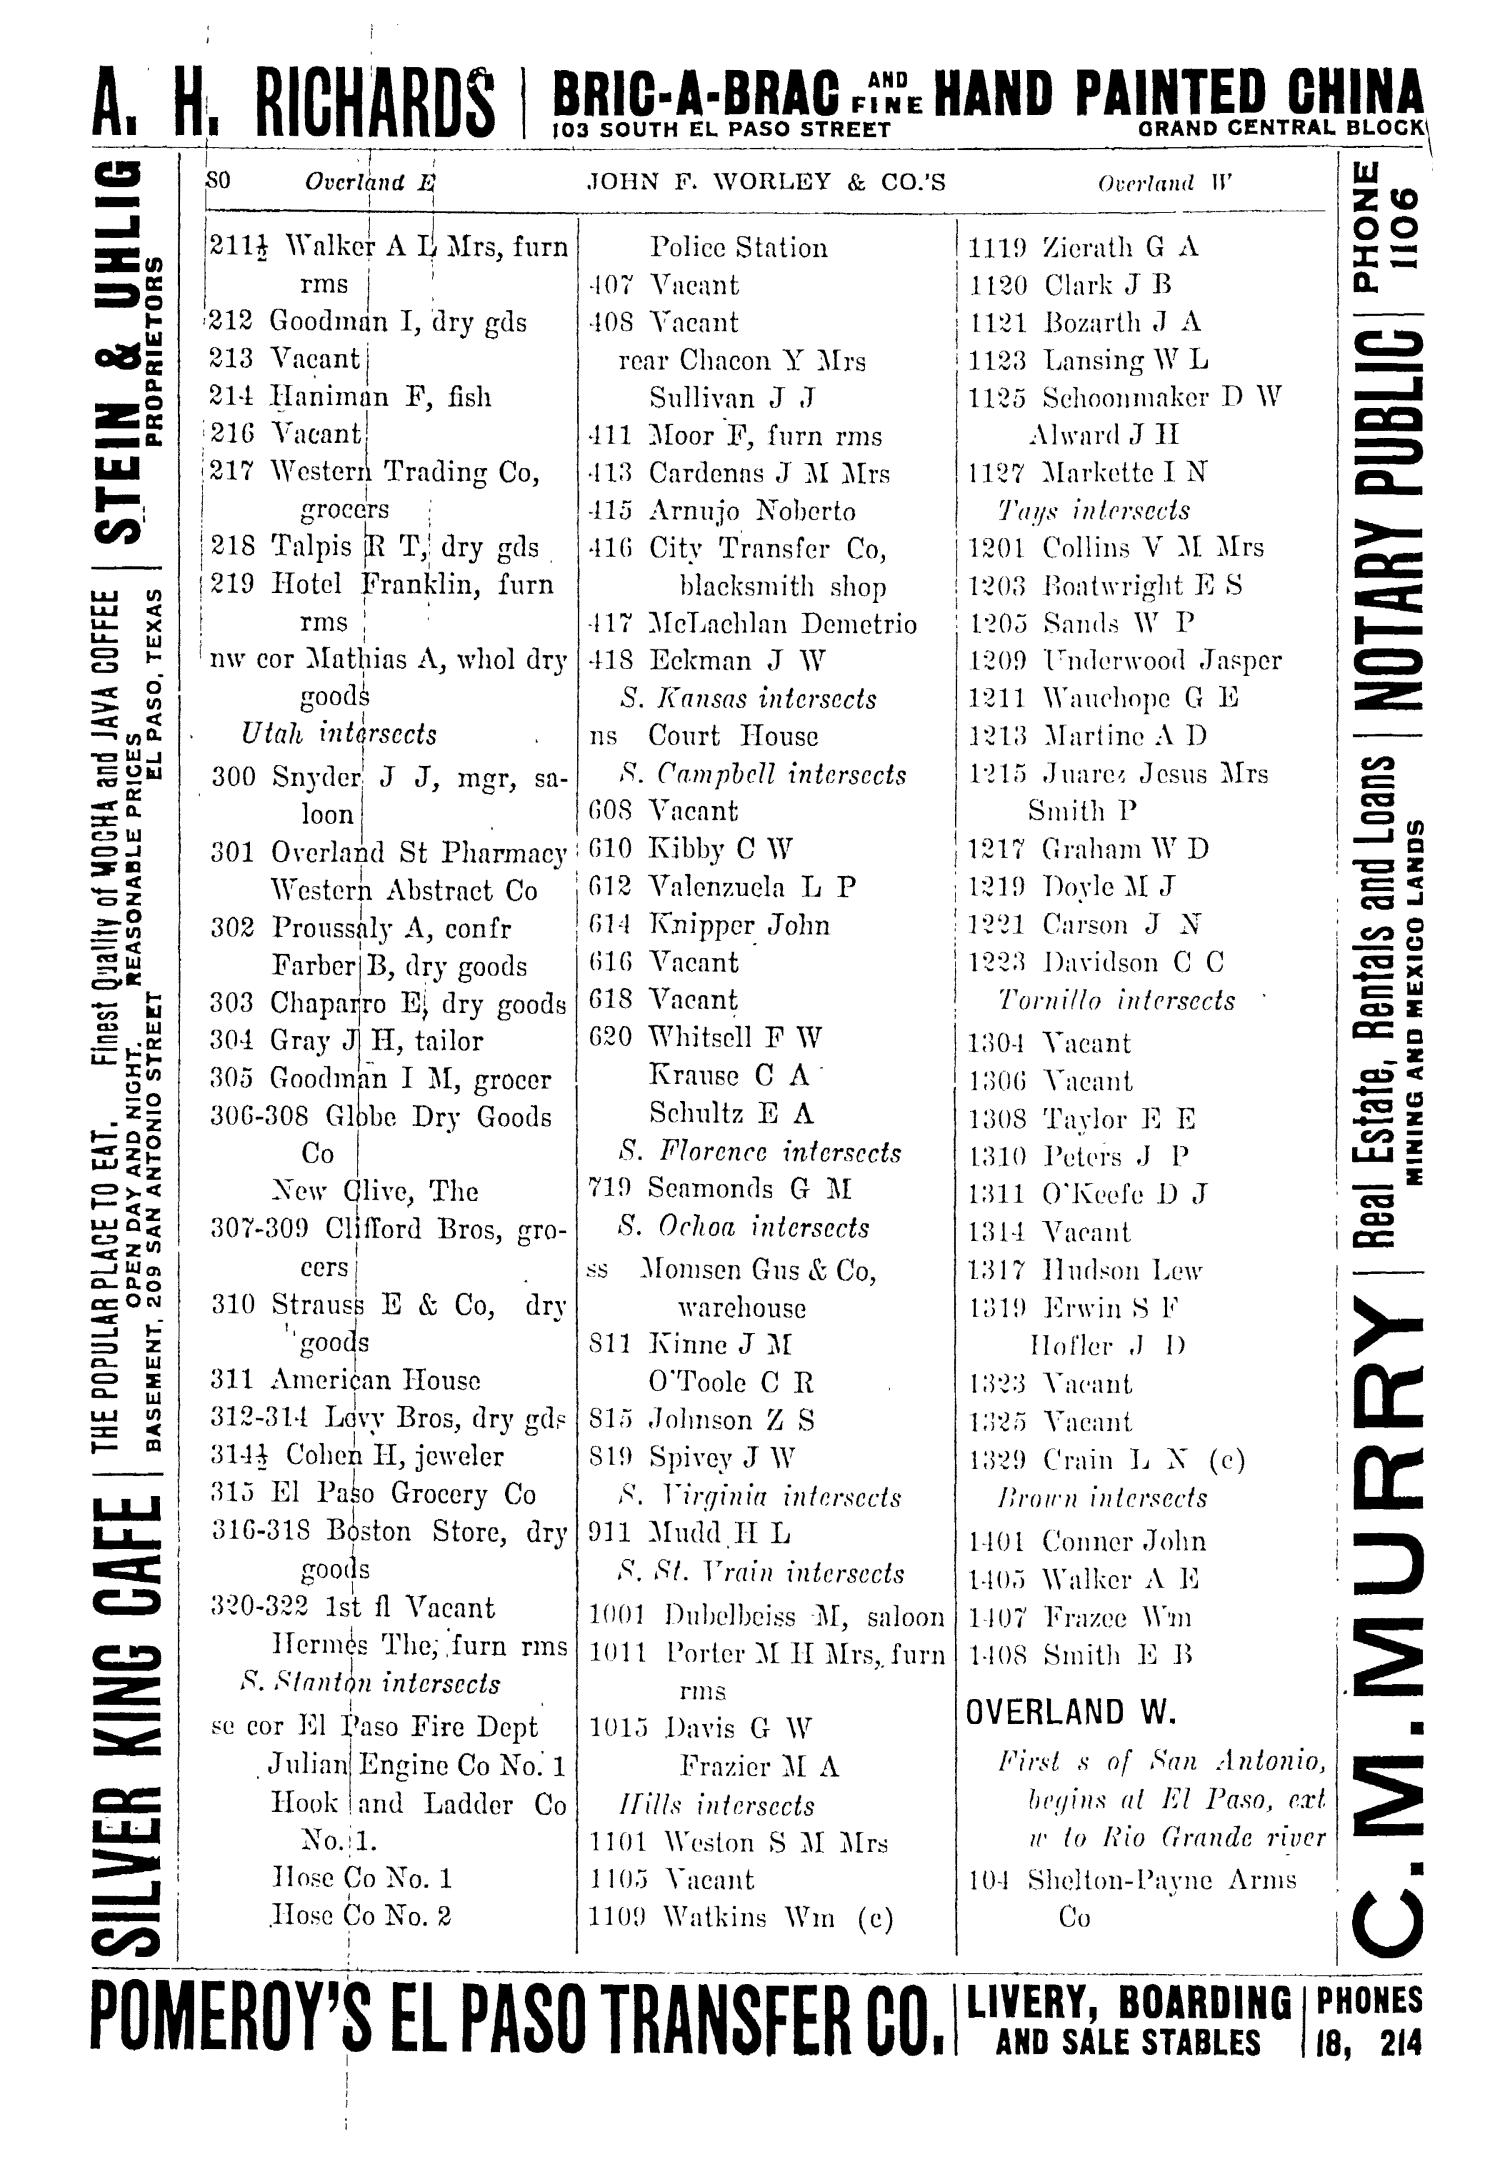 John F. Worley & Co.'s El Paso Directory for 1906
                                                
                                                    80
                                                